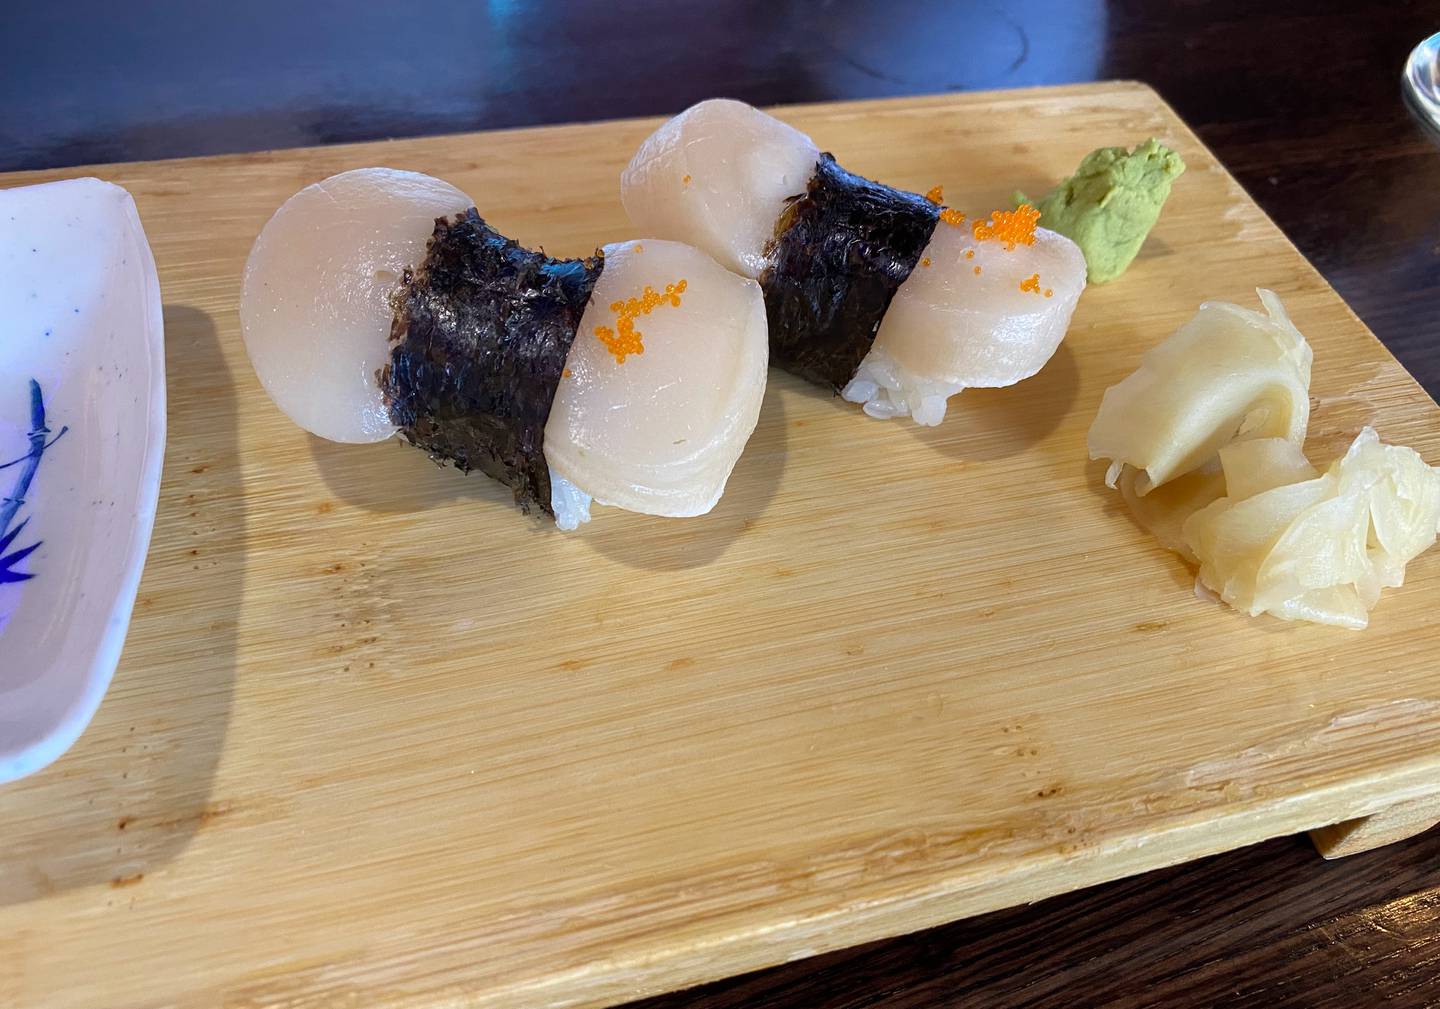 My fellow diner also selected a plate of nigiri scallops at Yummy Asian Bistro.